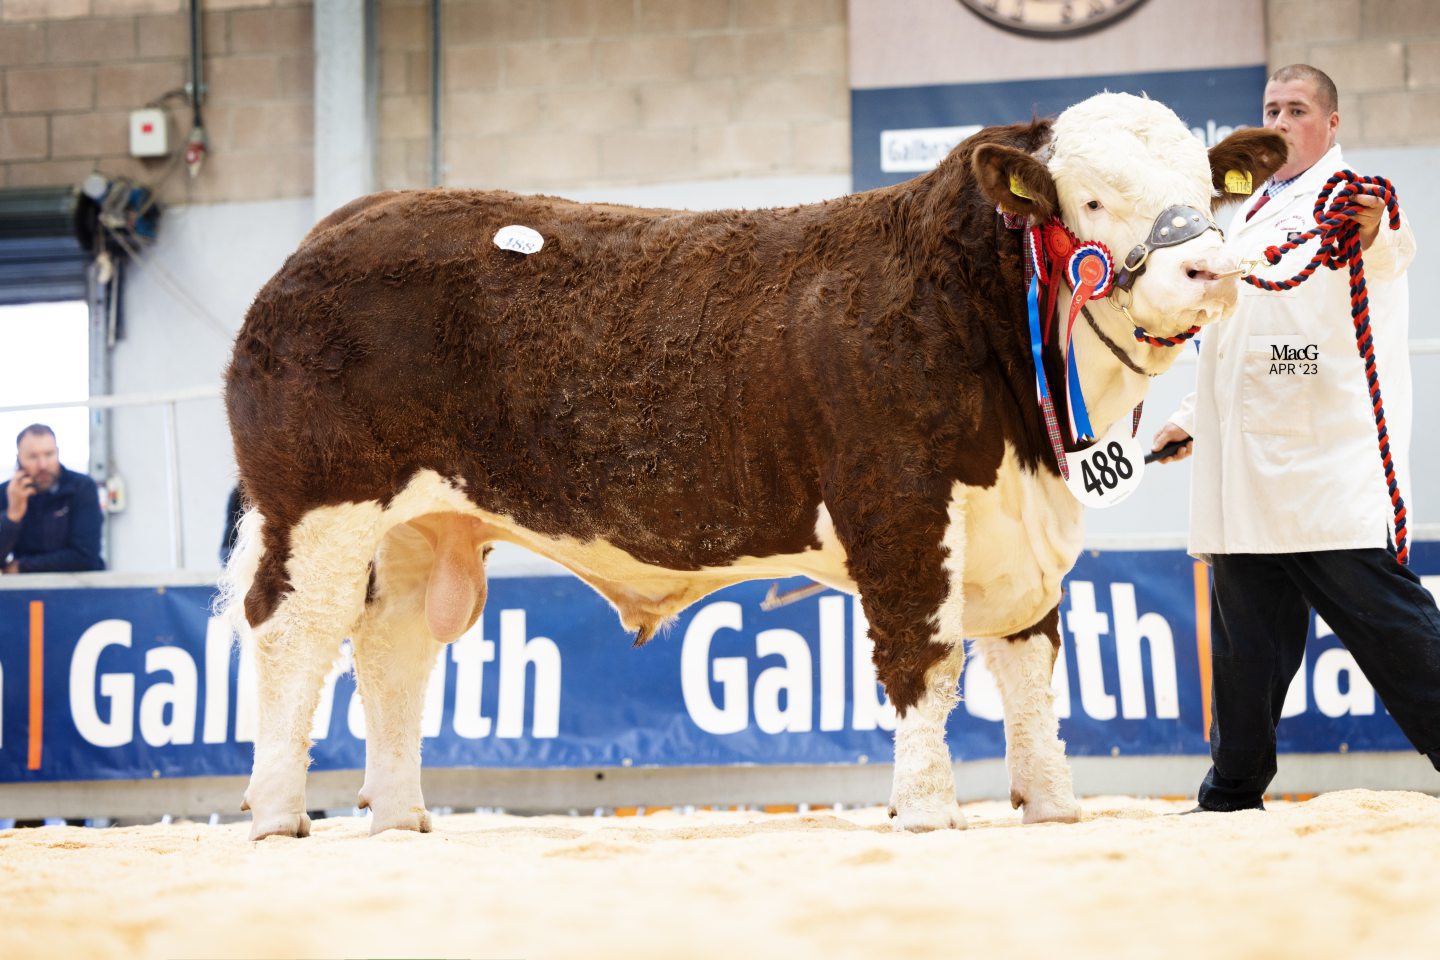 Stirling Bull Sales May 2023: Simmental breed leads